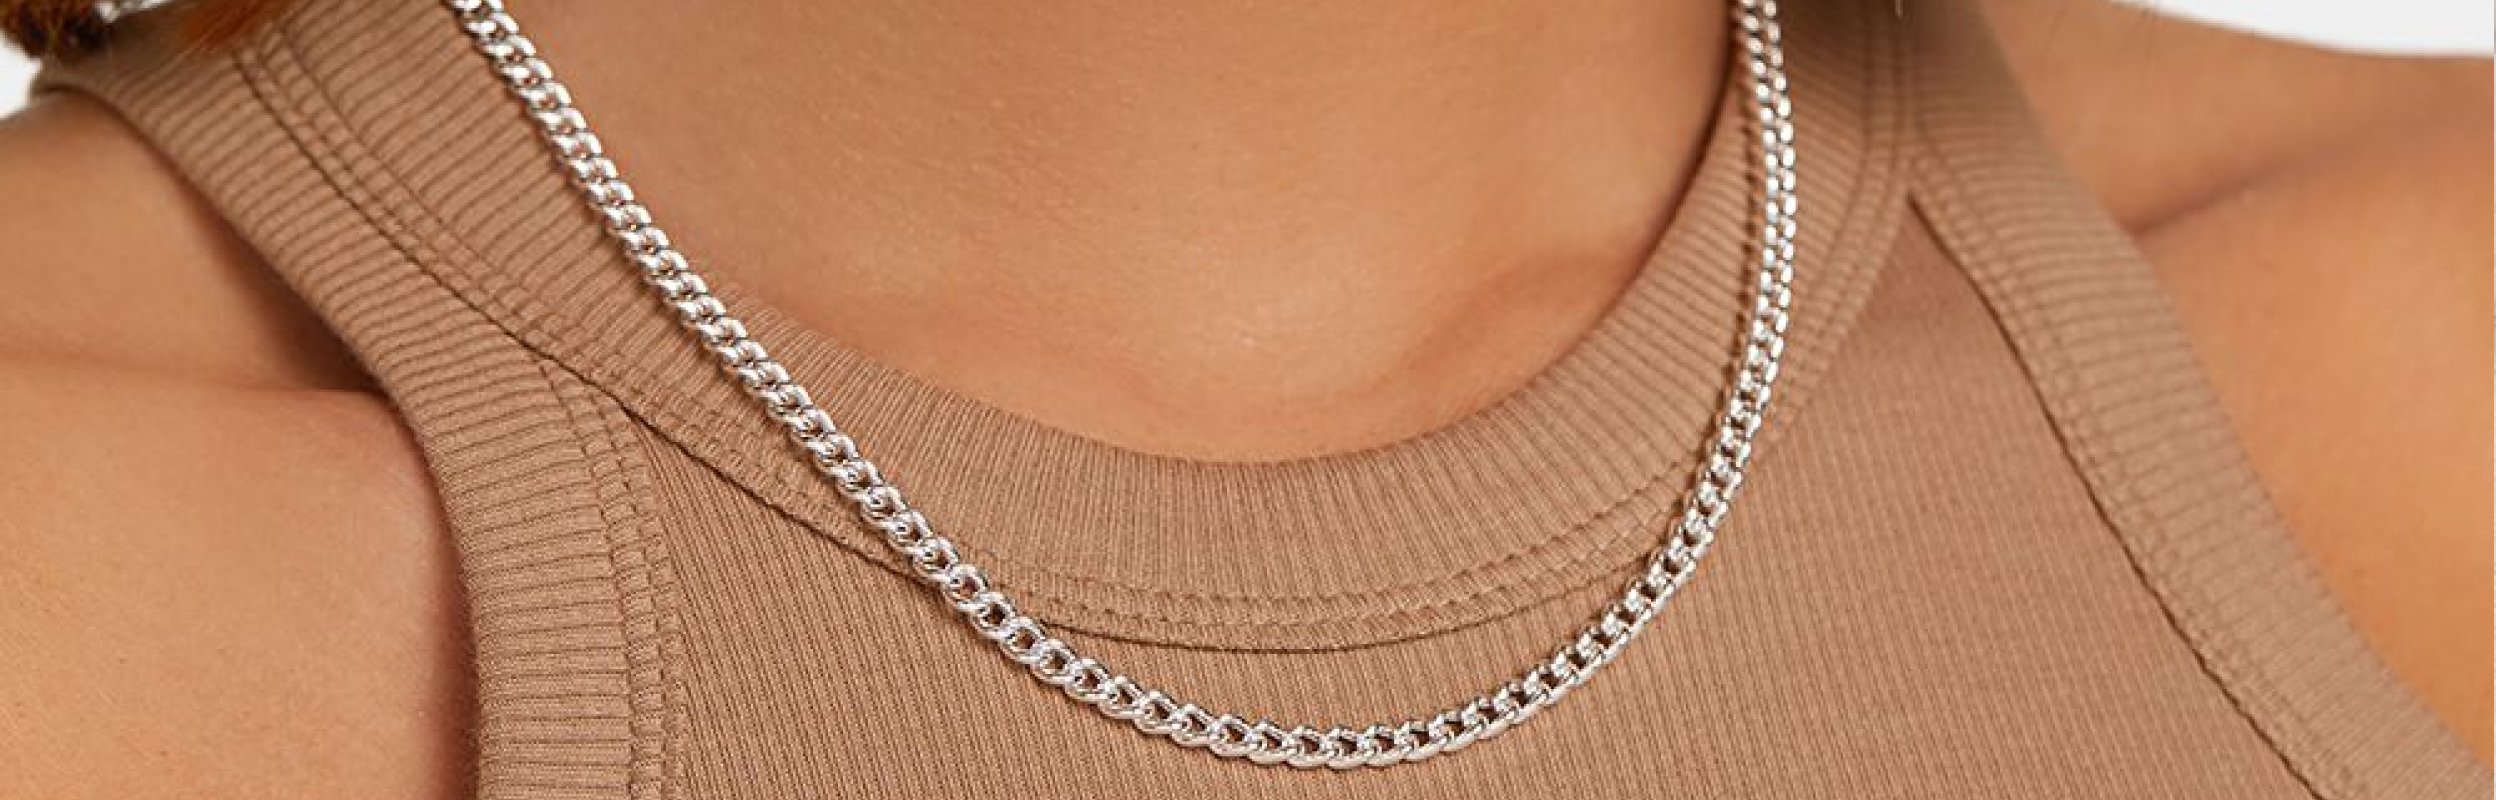 sterling silver curb chain necklace on woman